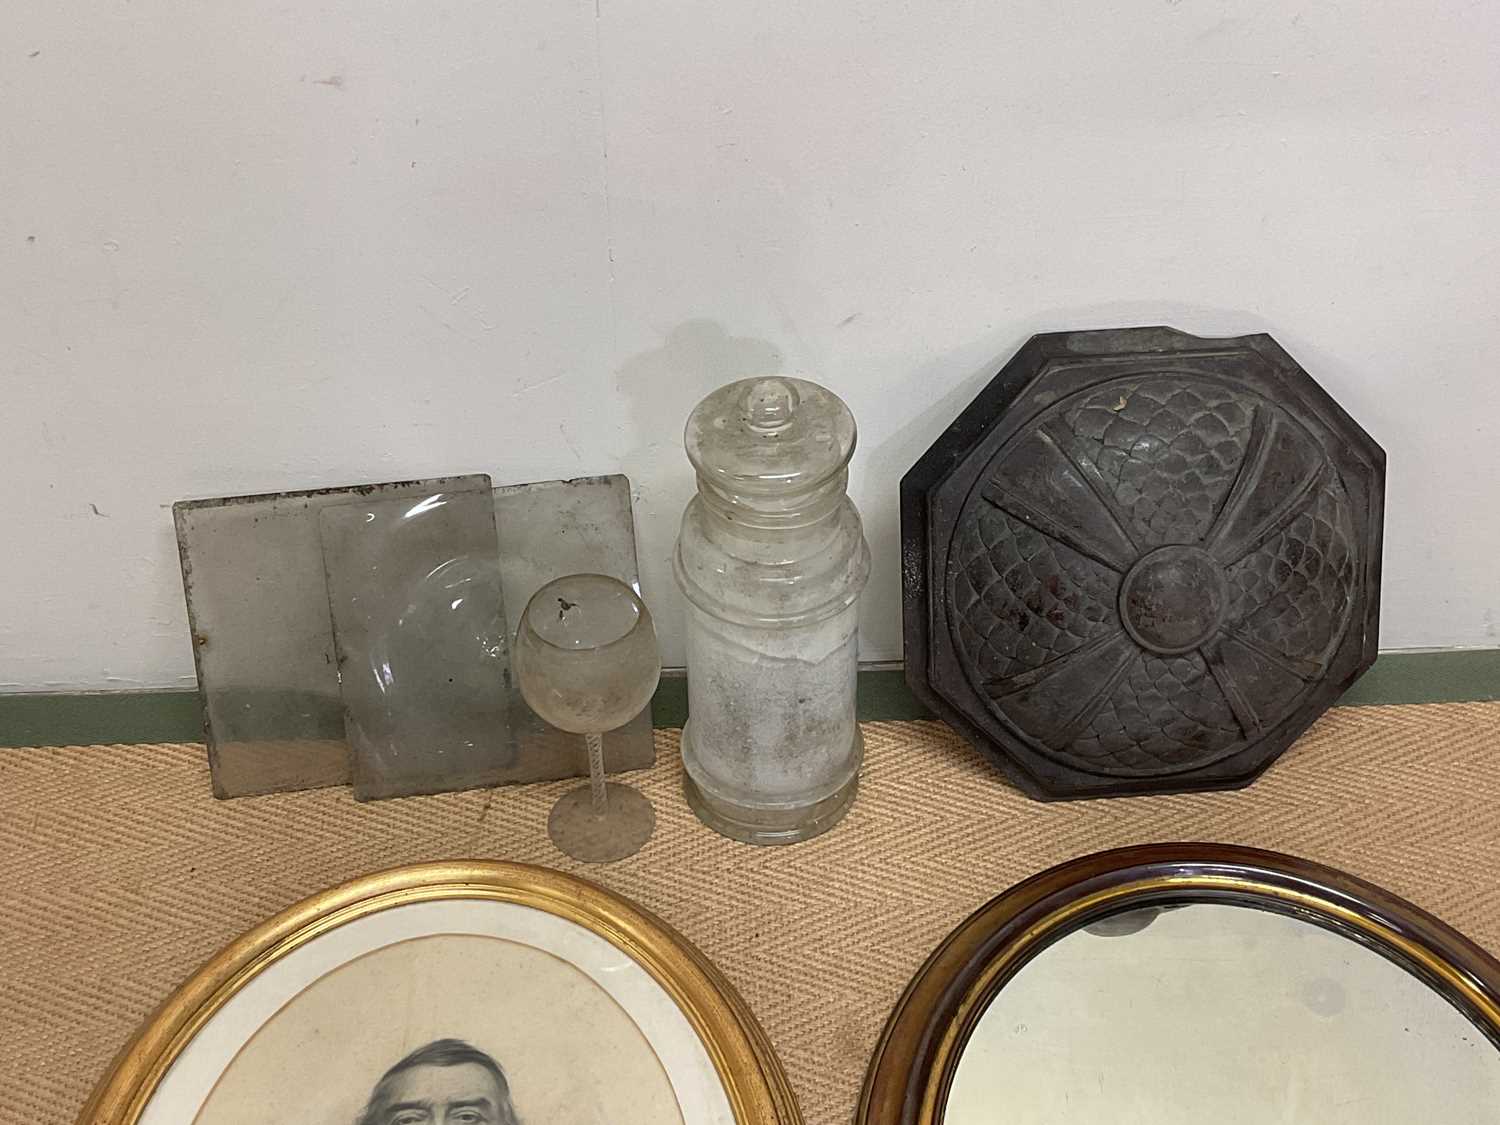 Mixed collectors' items including brass oval mirror, glass apothecary jar, wooden display box, - Image 2 of 3